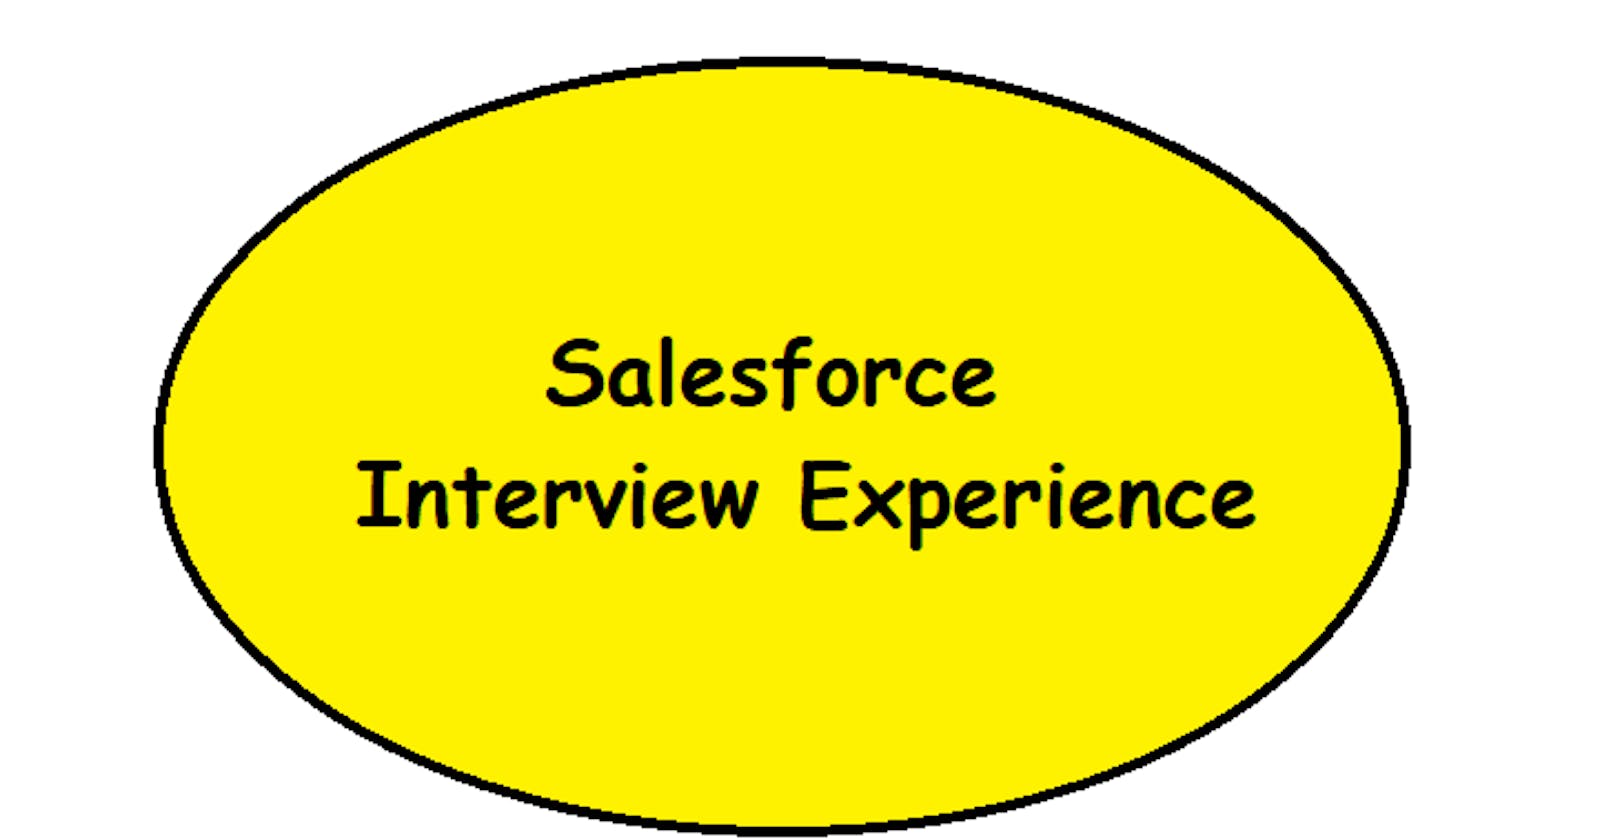 Salesforce Interview Experience